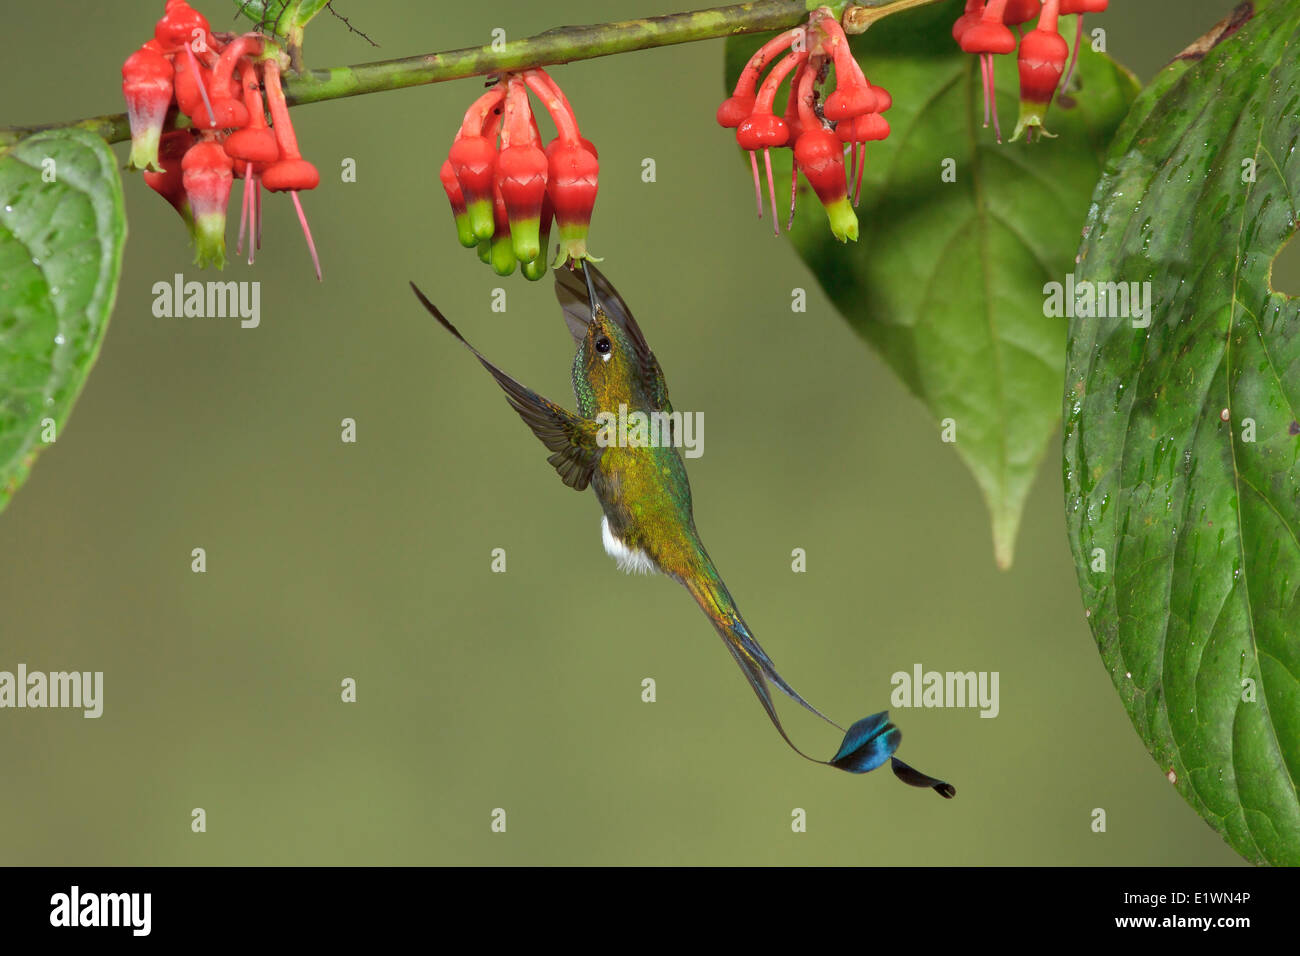 Booted Racket-tail hummingbird (Ocreatus underwoodii) flying while feeding at a flower in Ecuador, South America. Stock Photo